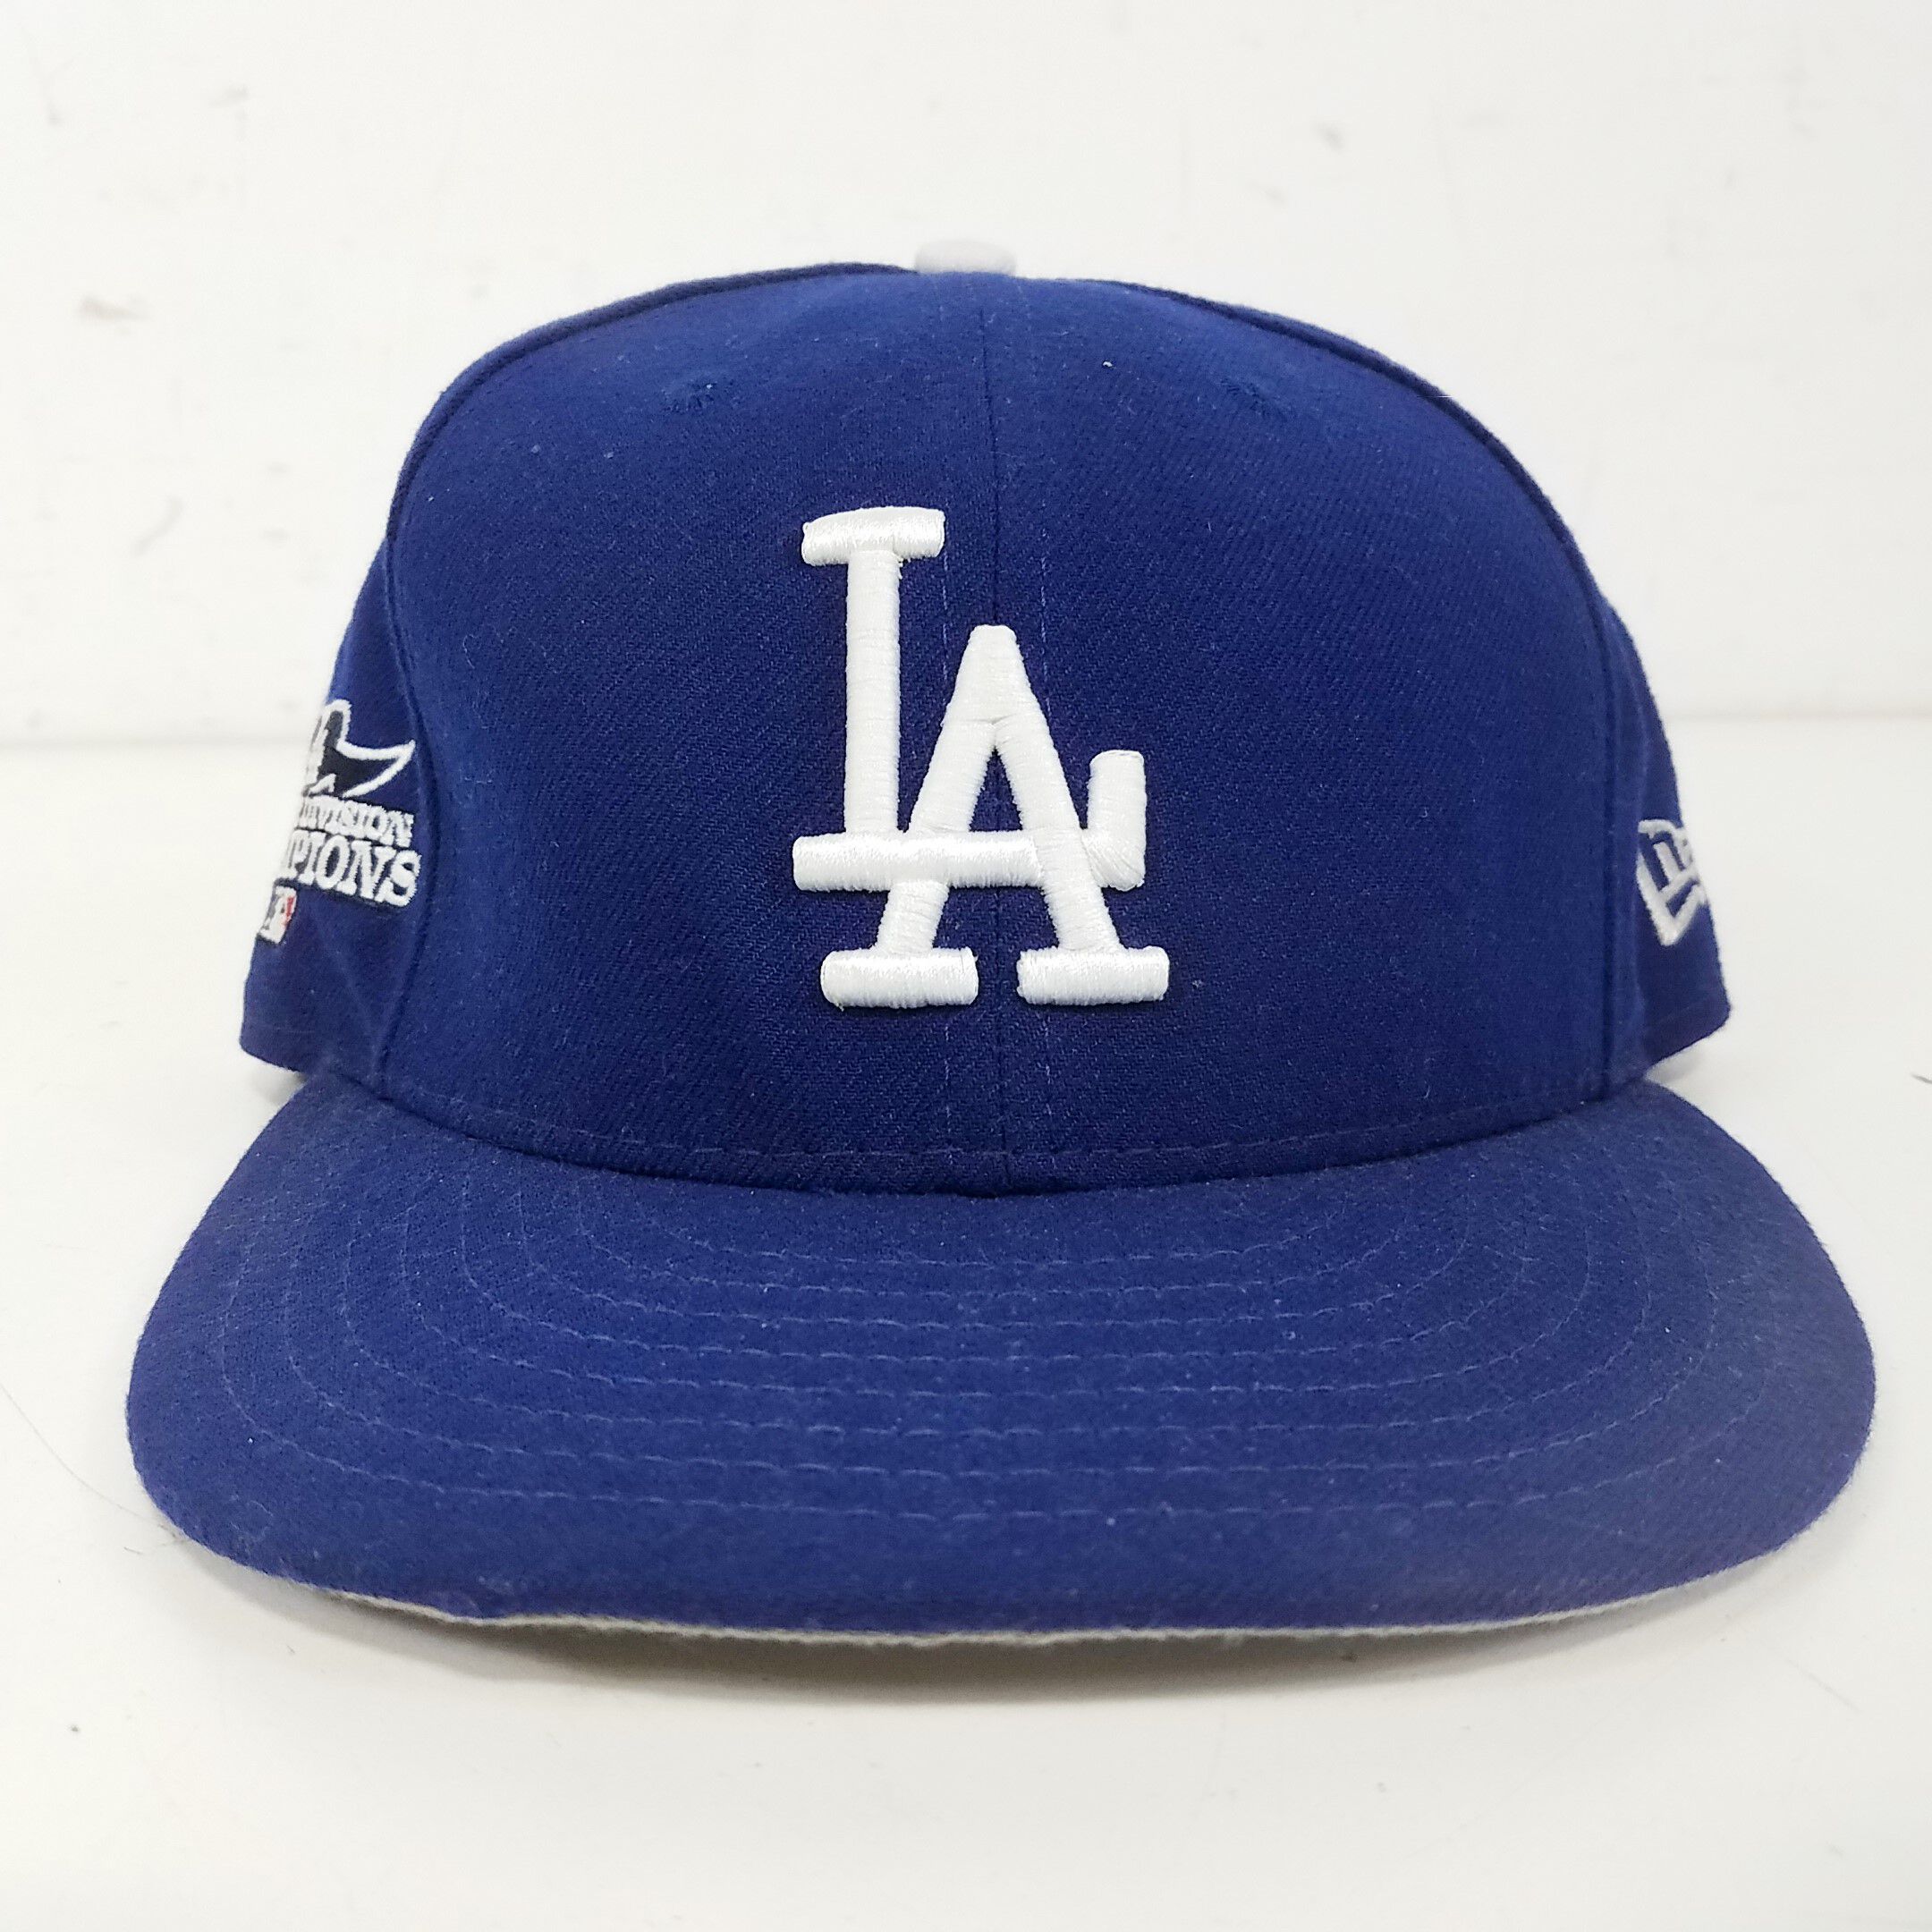 Buy the New Era FIFTY Dodger LA Hat   GoodwillFinds